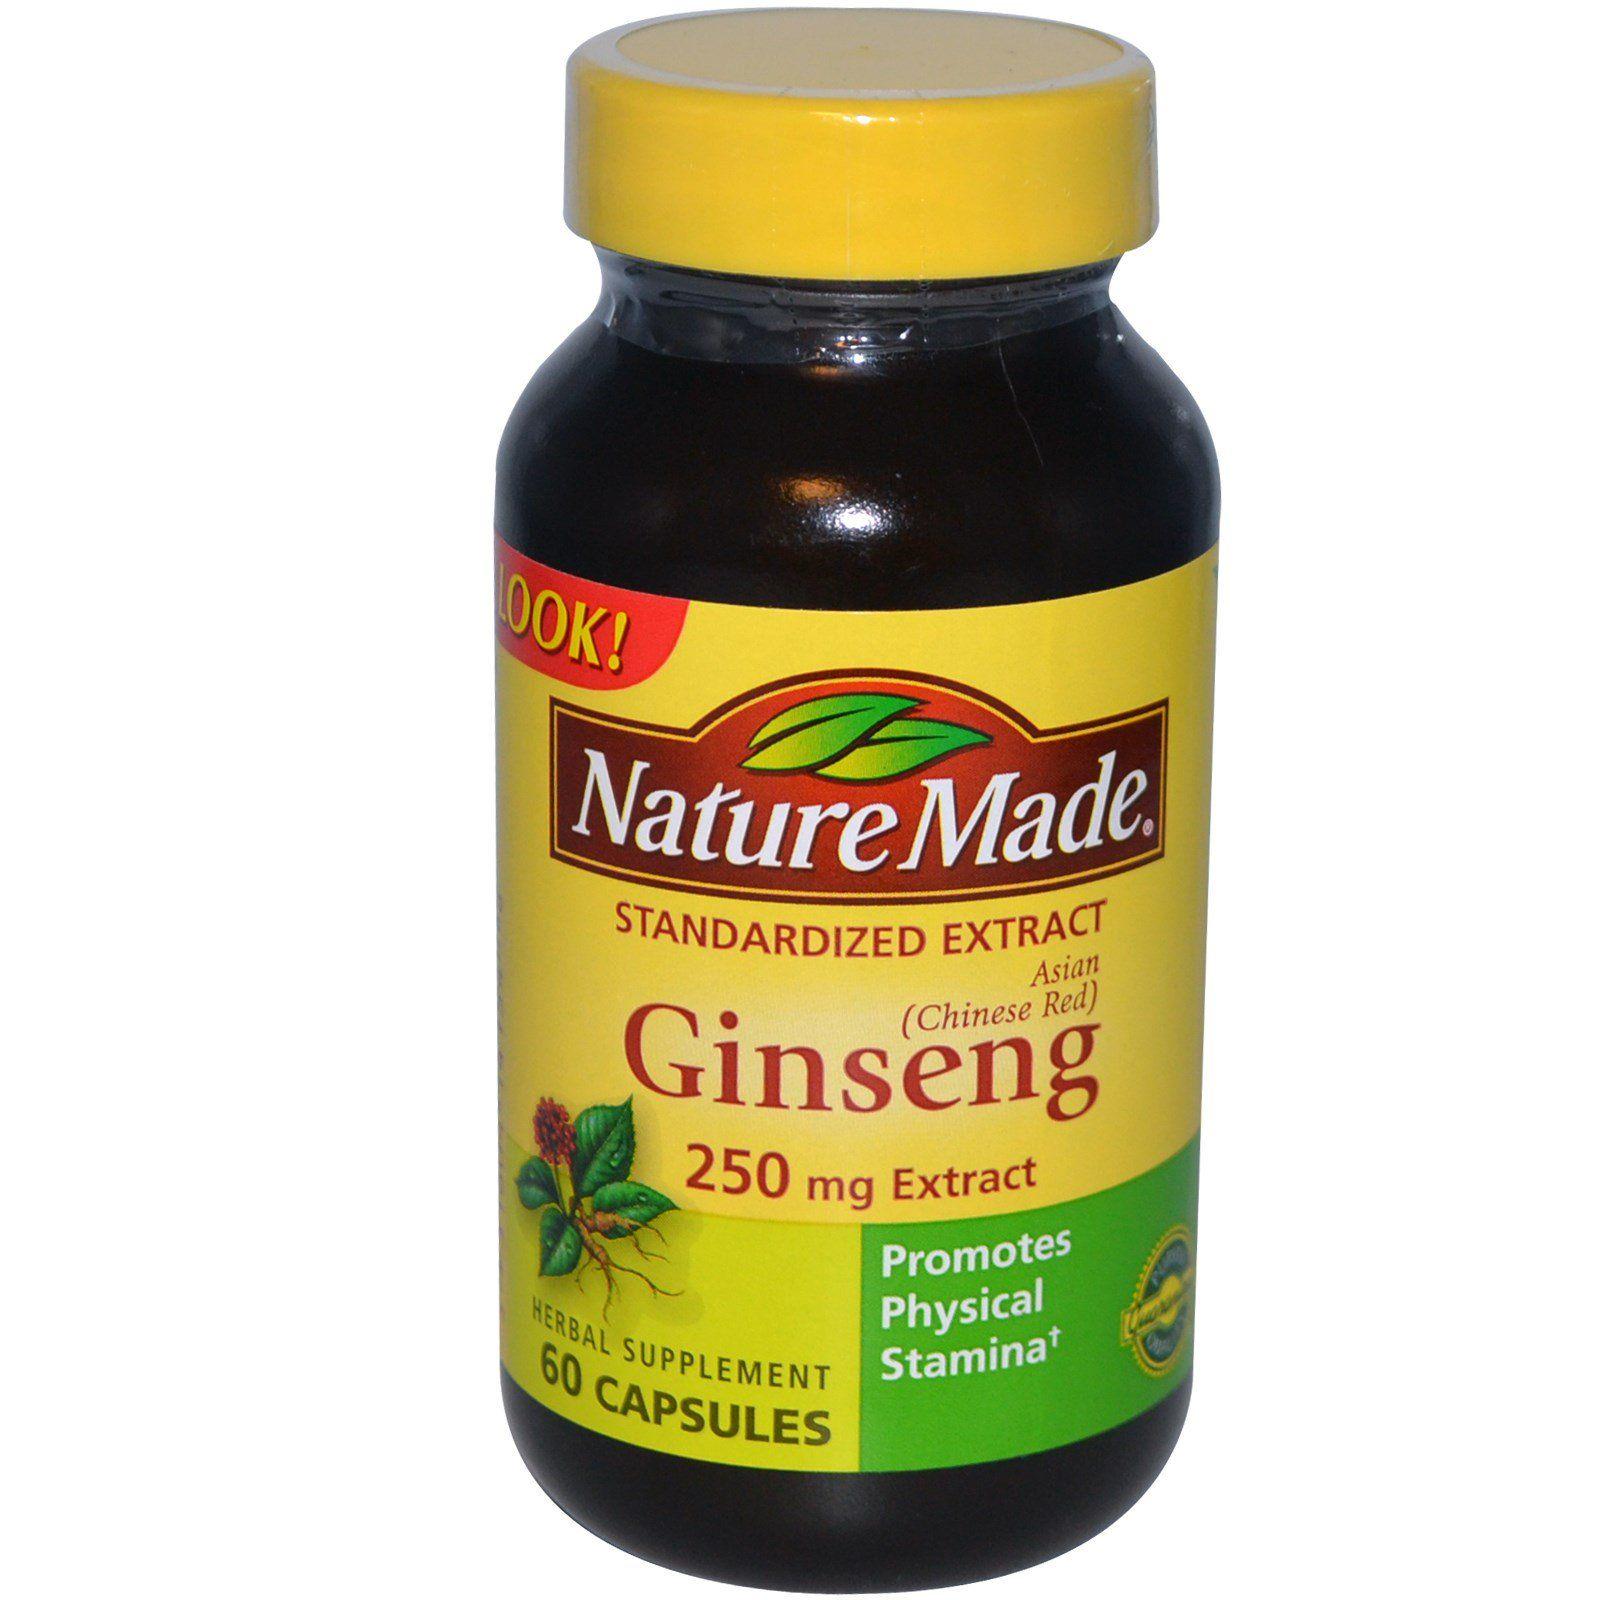 Captian R. reccomend Asian red ginseng